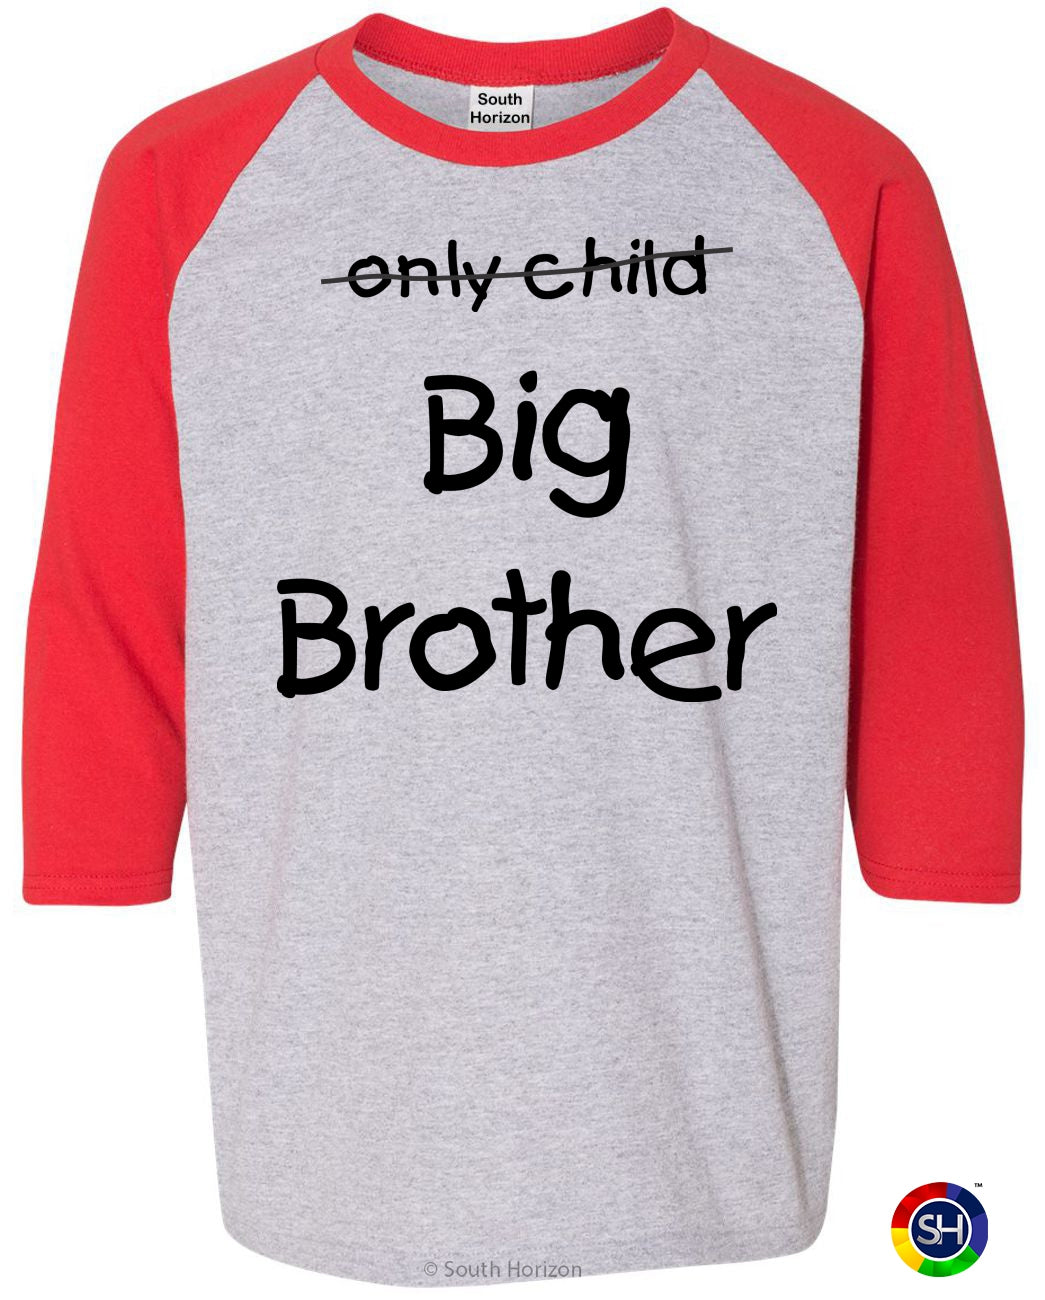 Only Child Big Brother on Kids Baseball Shirt in 8 colors – South Horizon T- Shirt Company